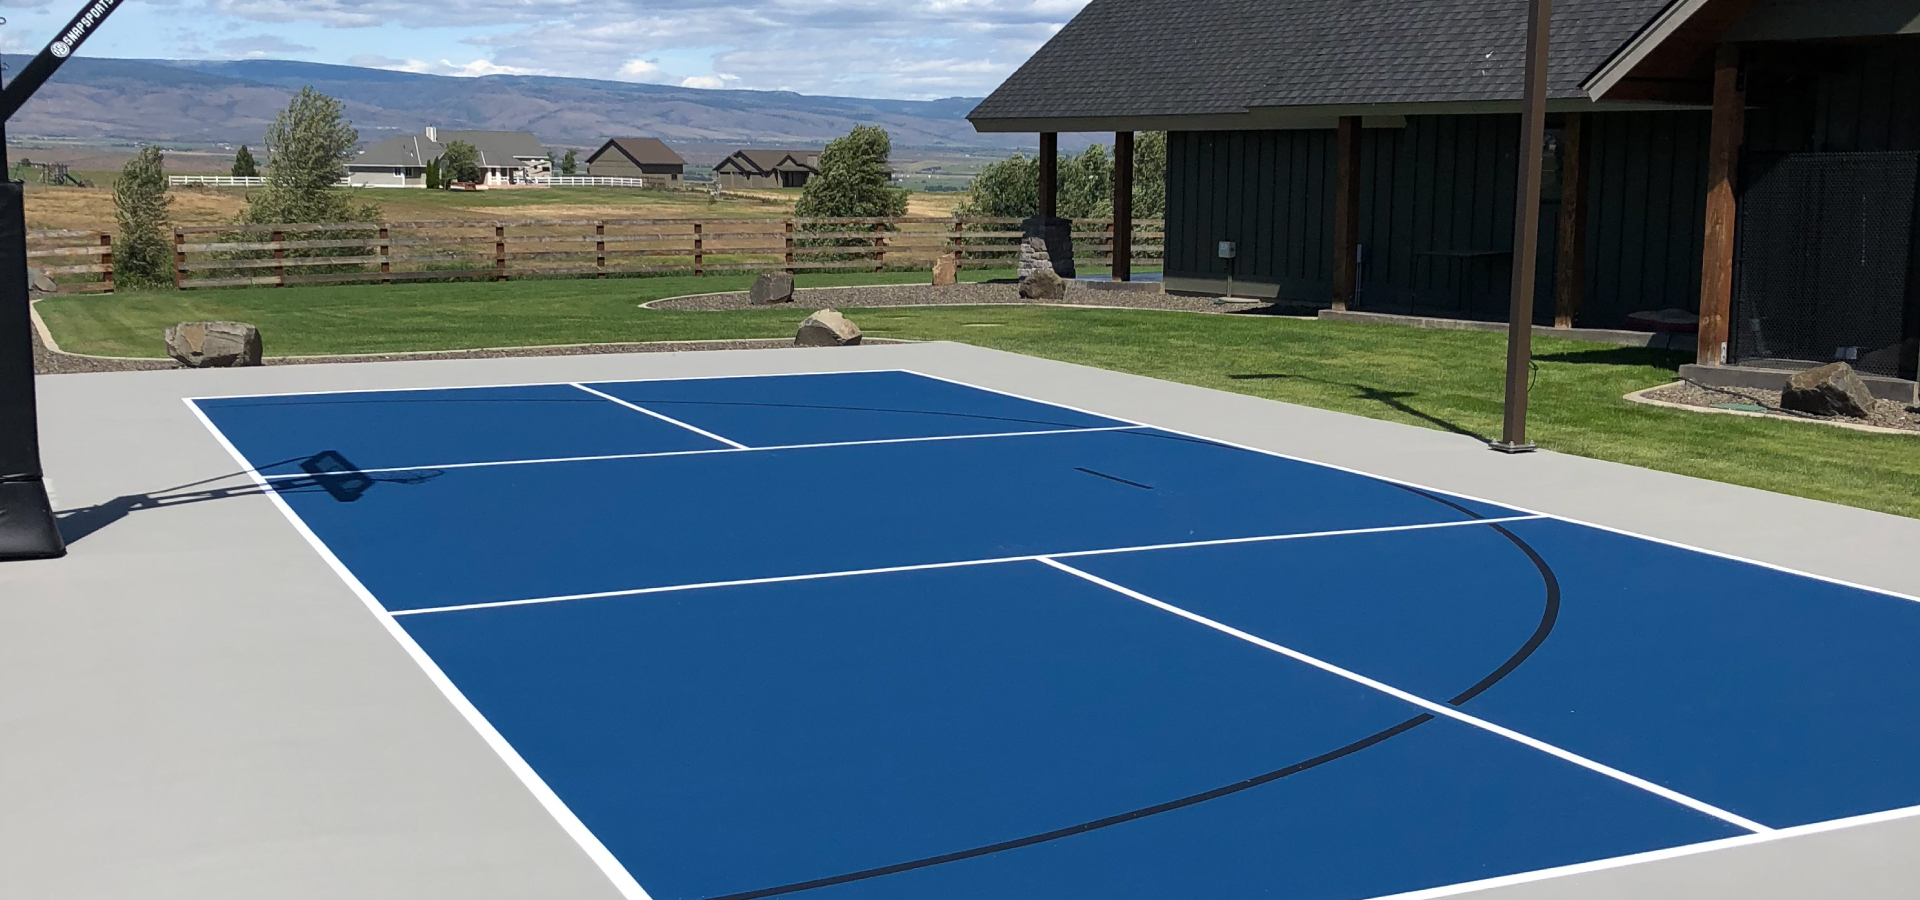 NW Court Consultants Pickleball court Surfacing